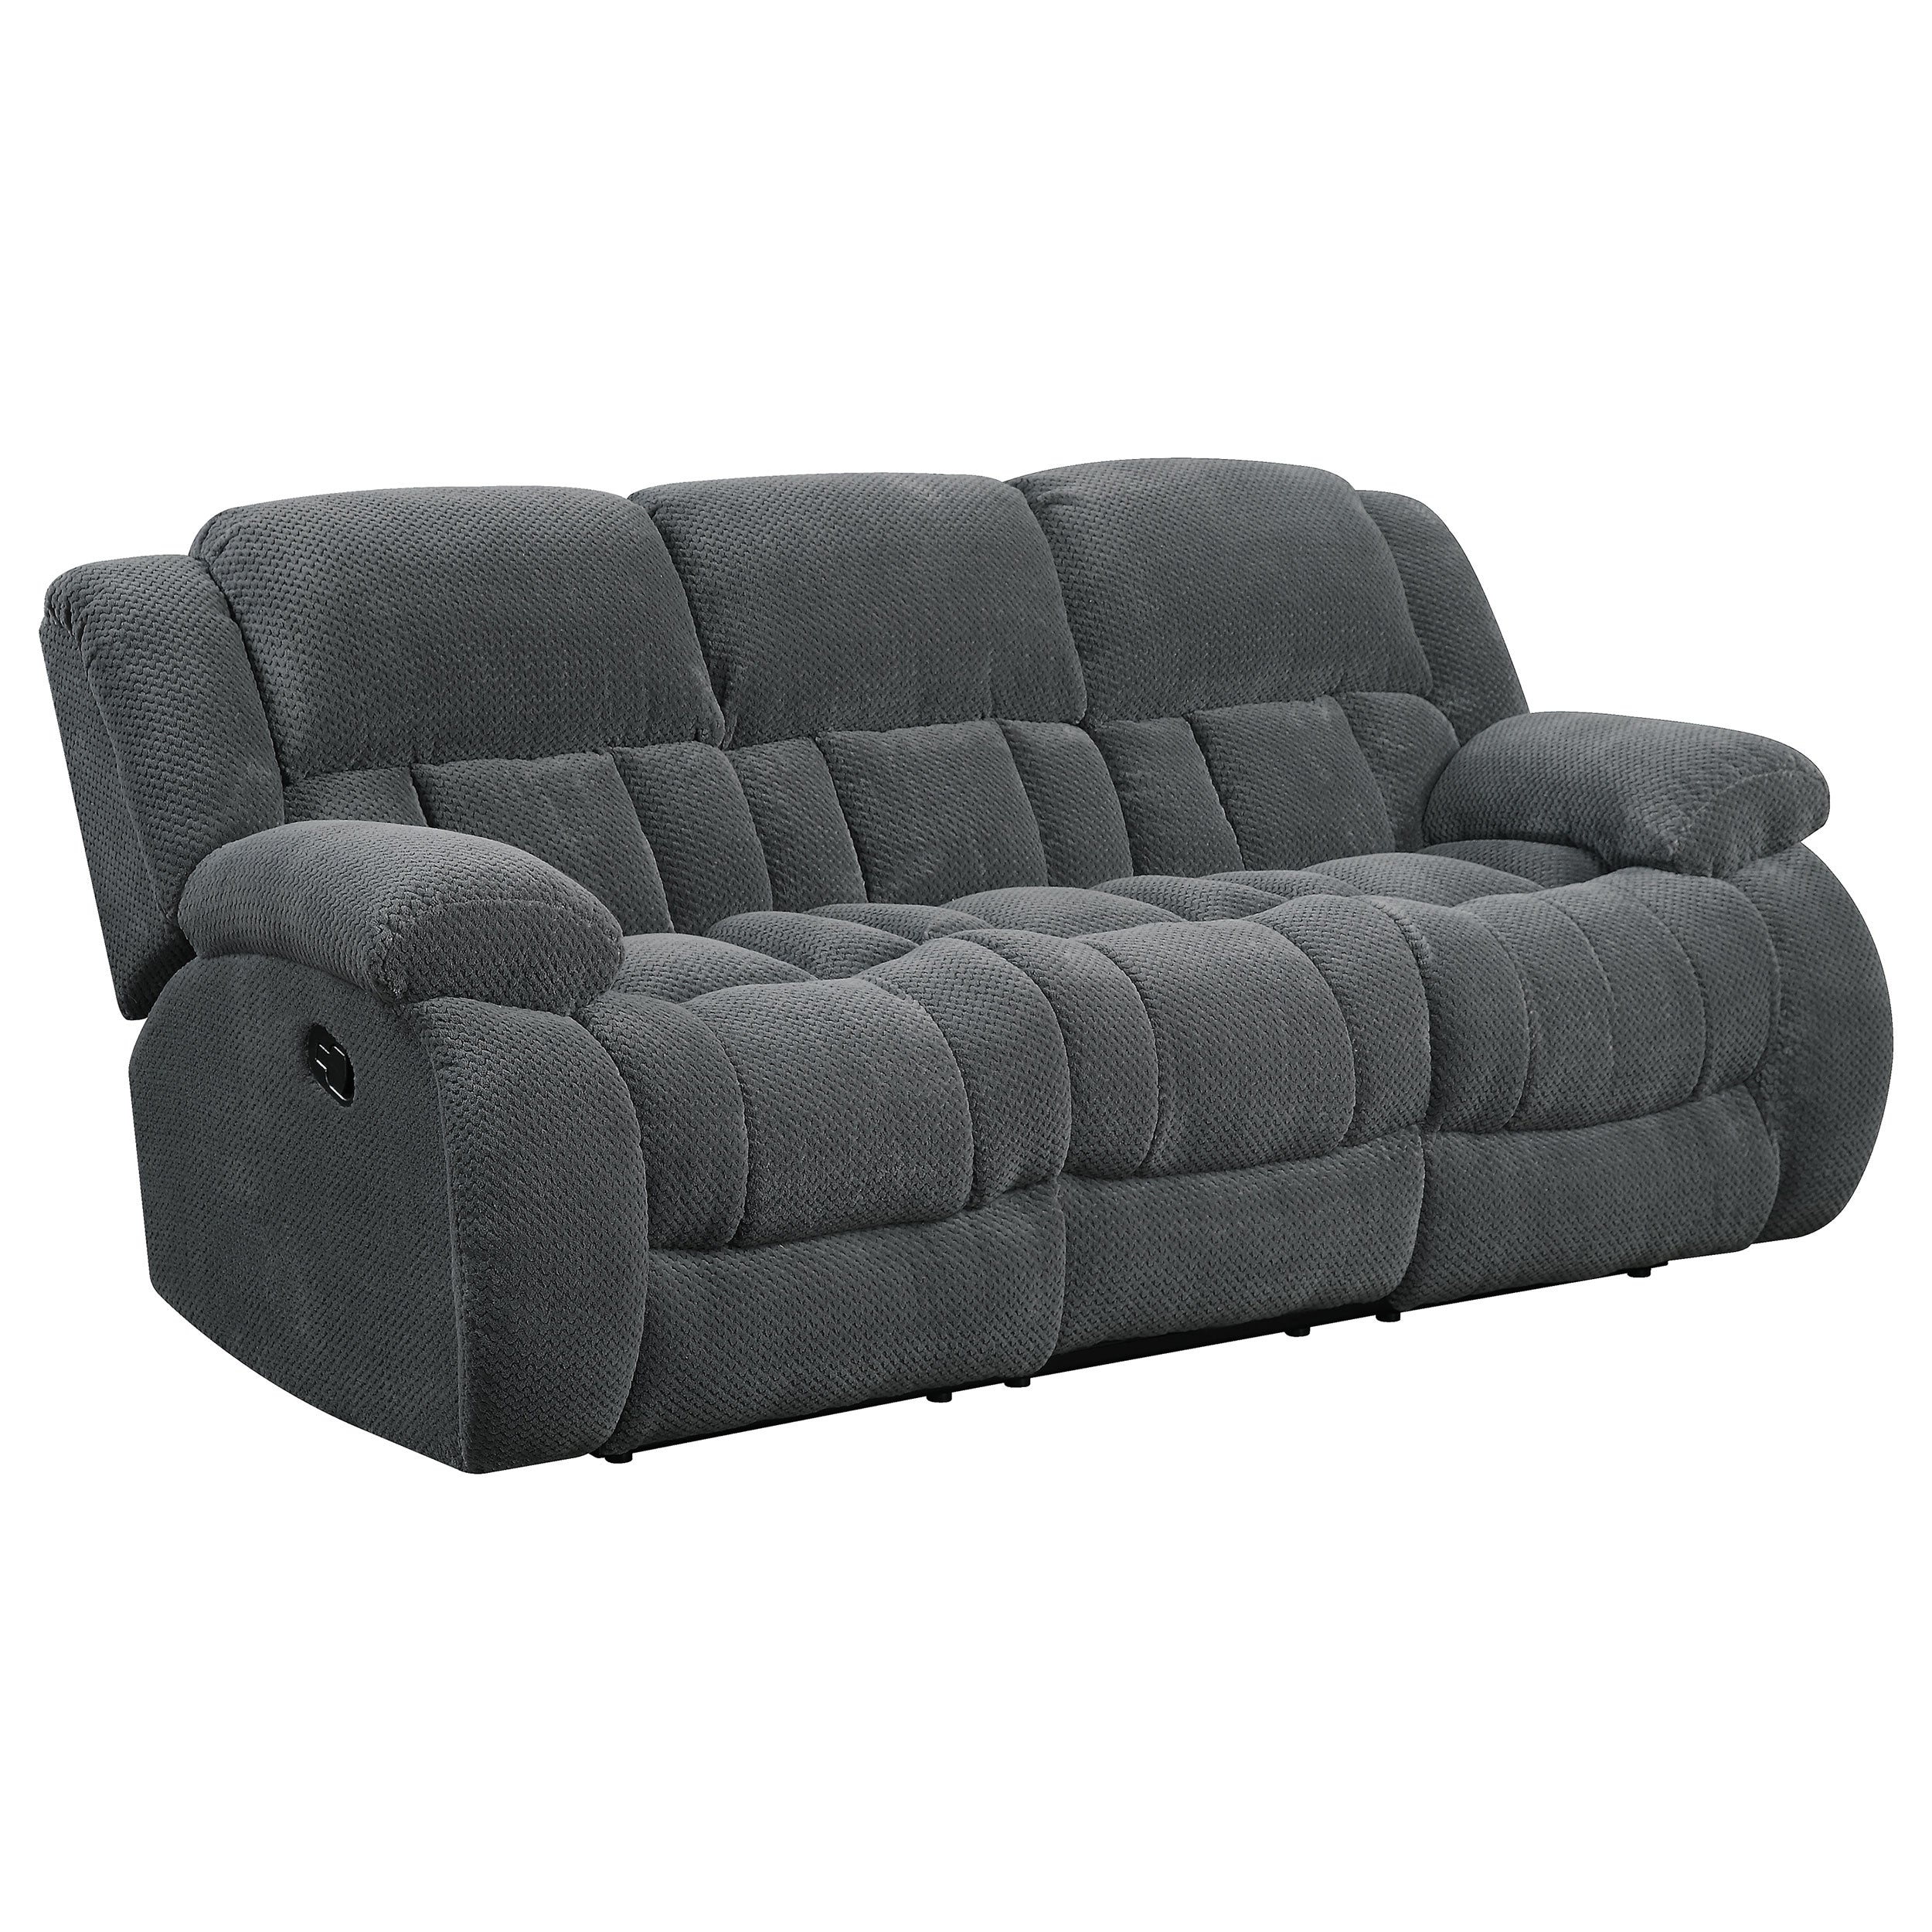 3 PC Weissman Upholstered Tufted Reclining Sofa Love Seat Recliner Living Room Set In Gray